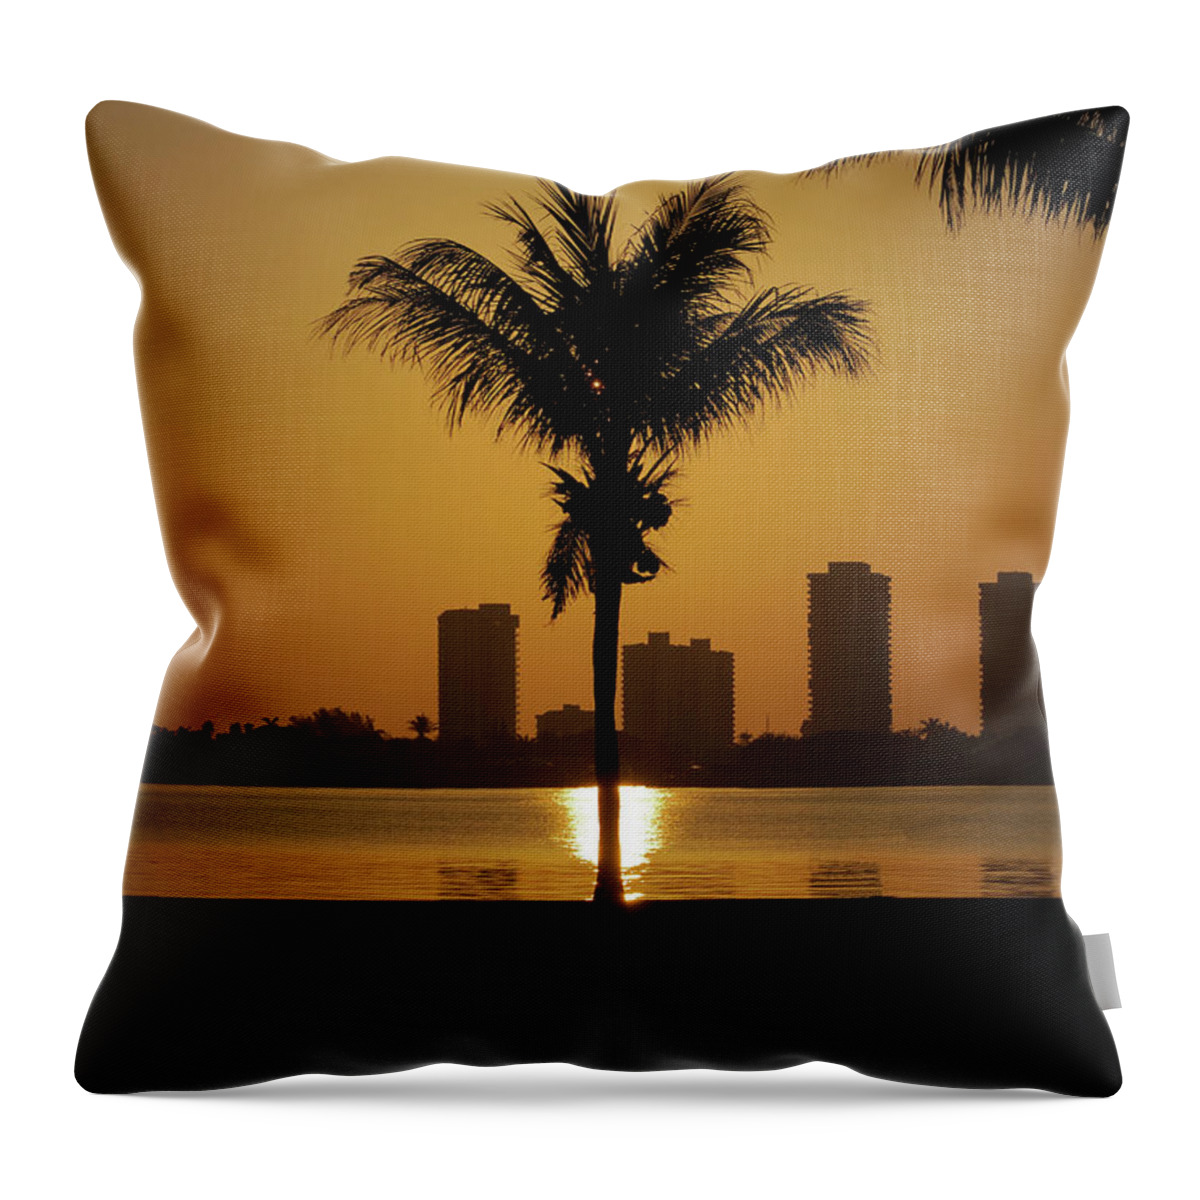 Sunrise Throw Pillow featuring the photograph 9- Reflections by Joseph Keane